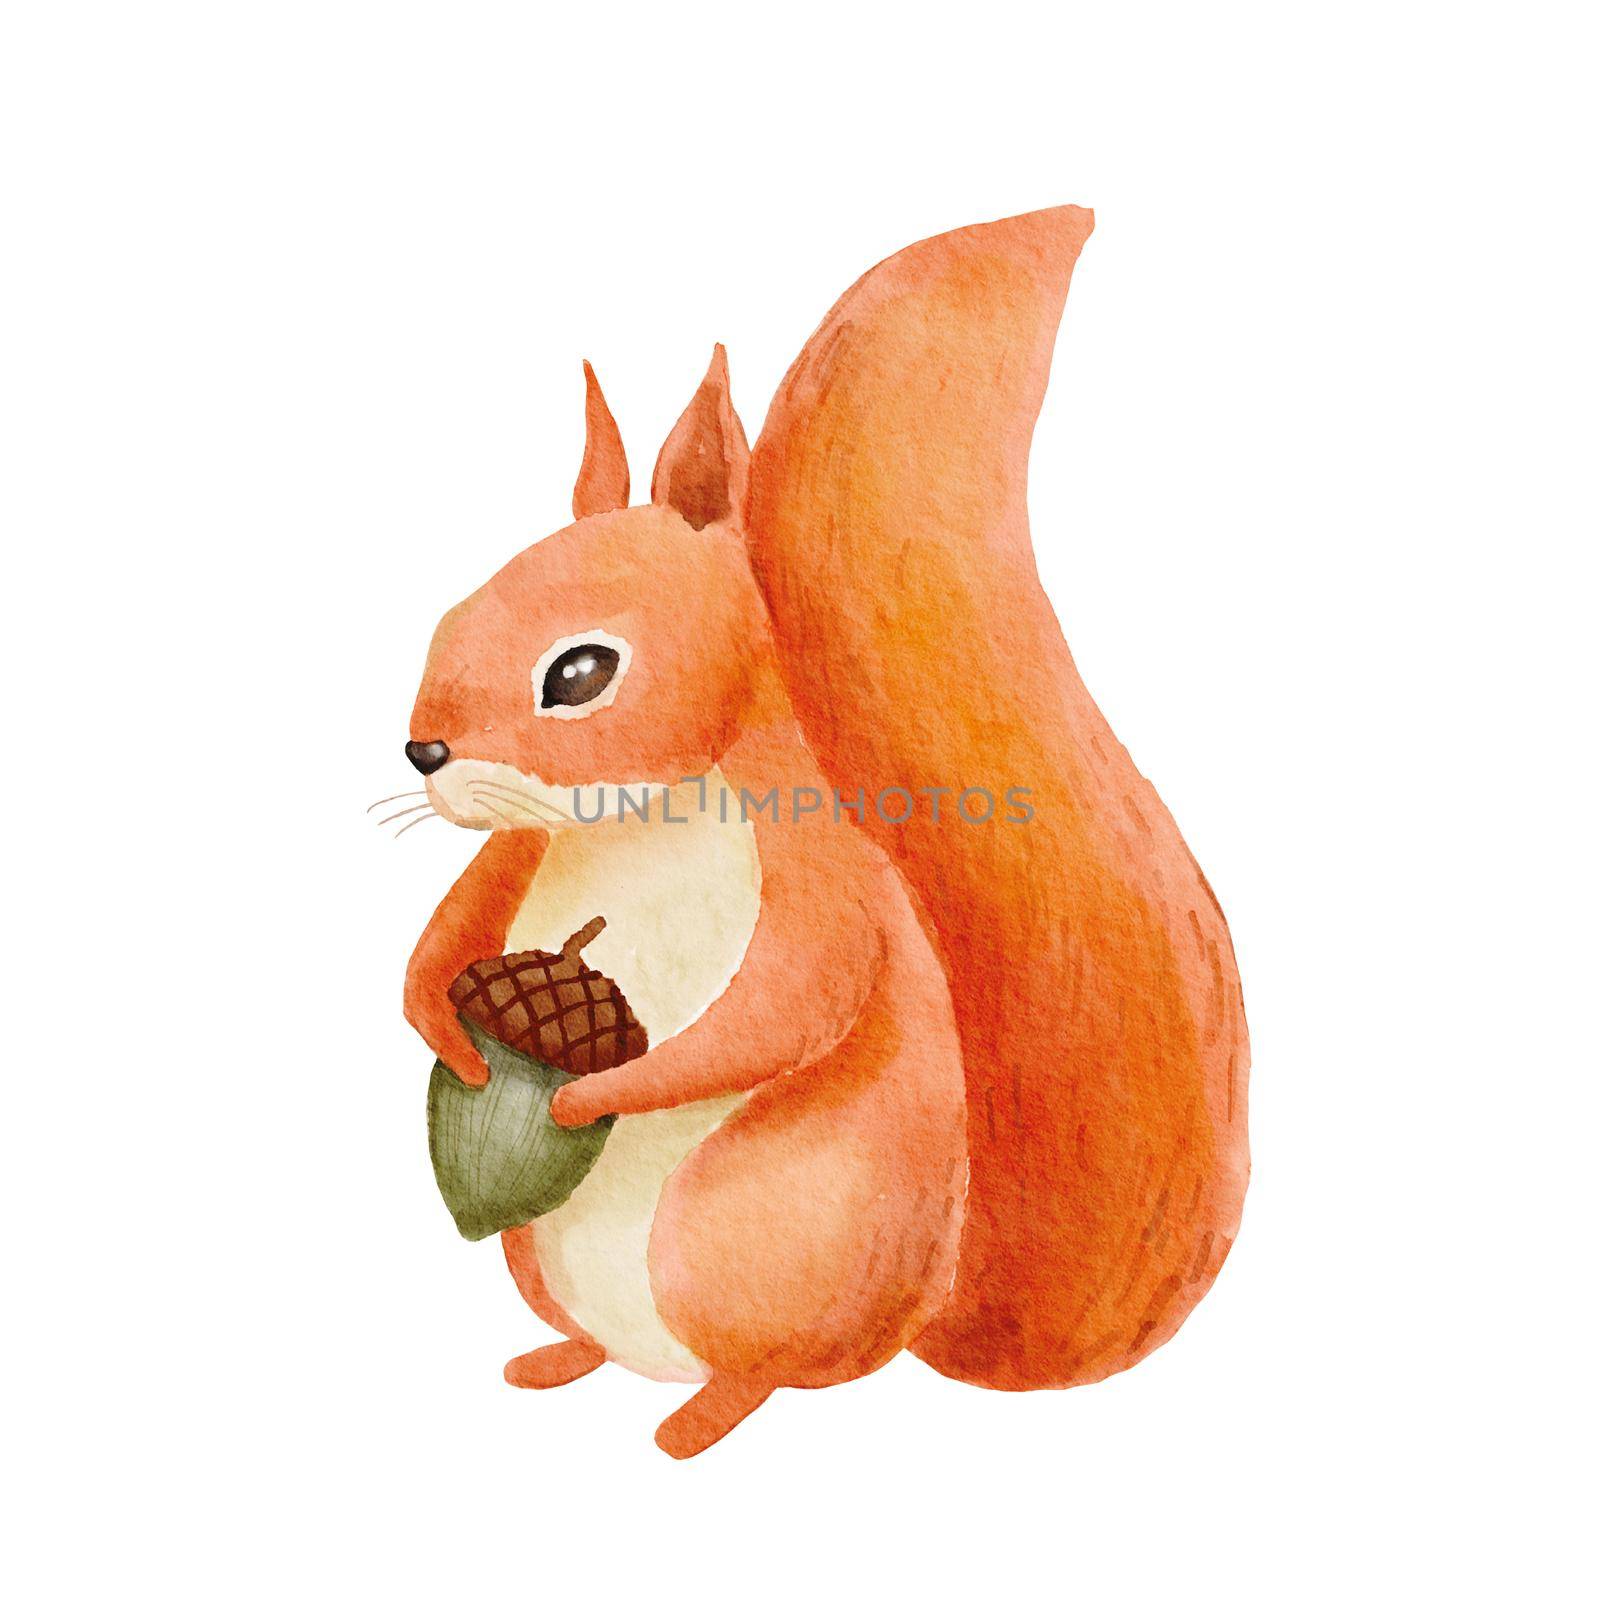 Illustration of watercolor cute red squirrel. Hand drawn character forest animal isolated on white. Woodland illustration